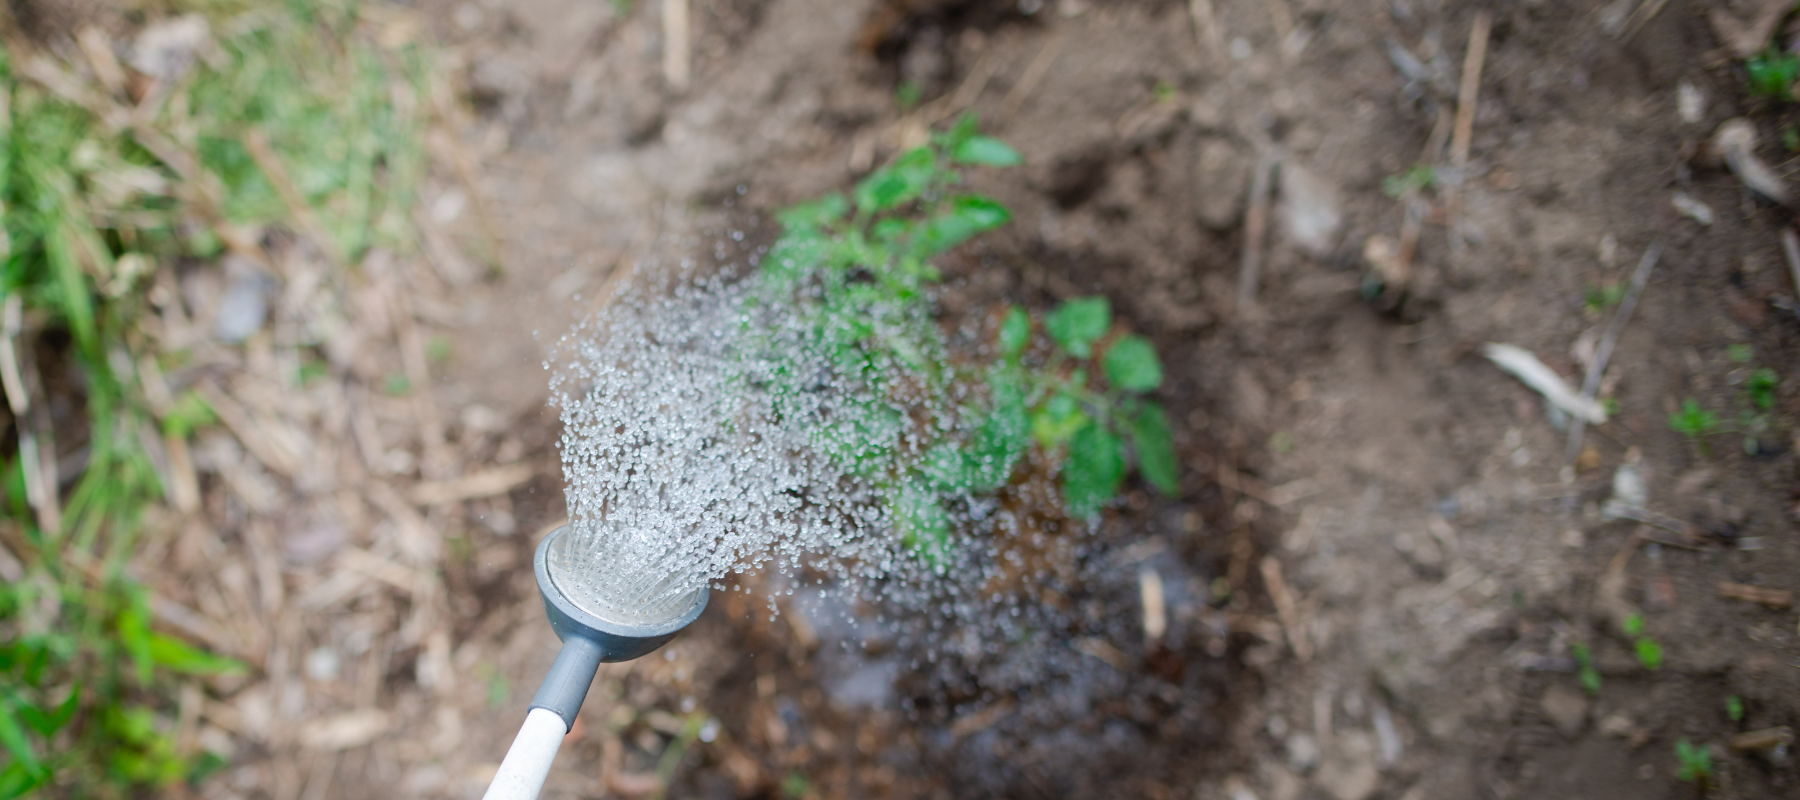 Tips on how to save water in the garden